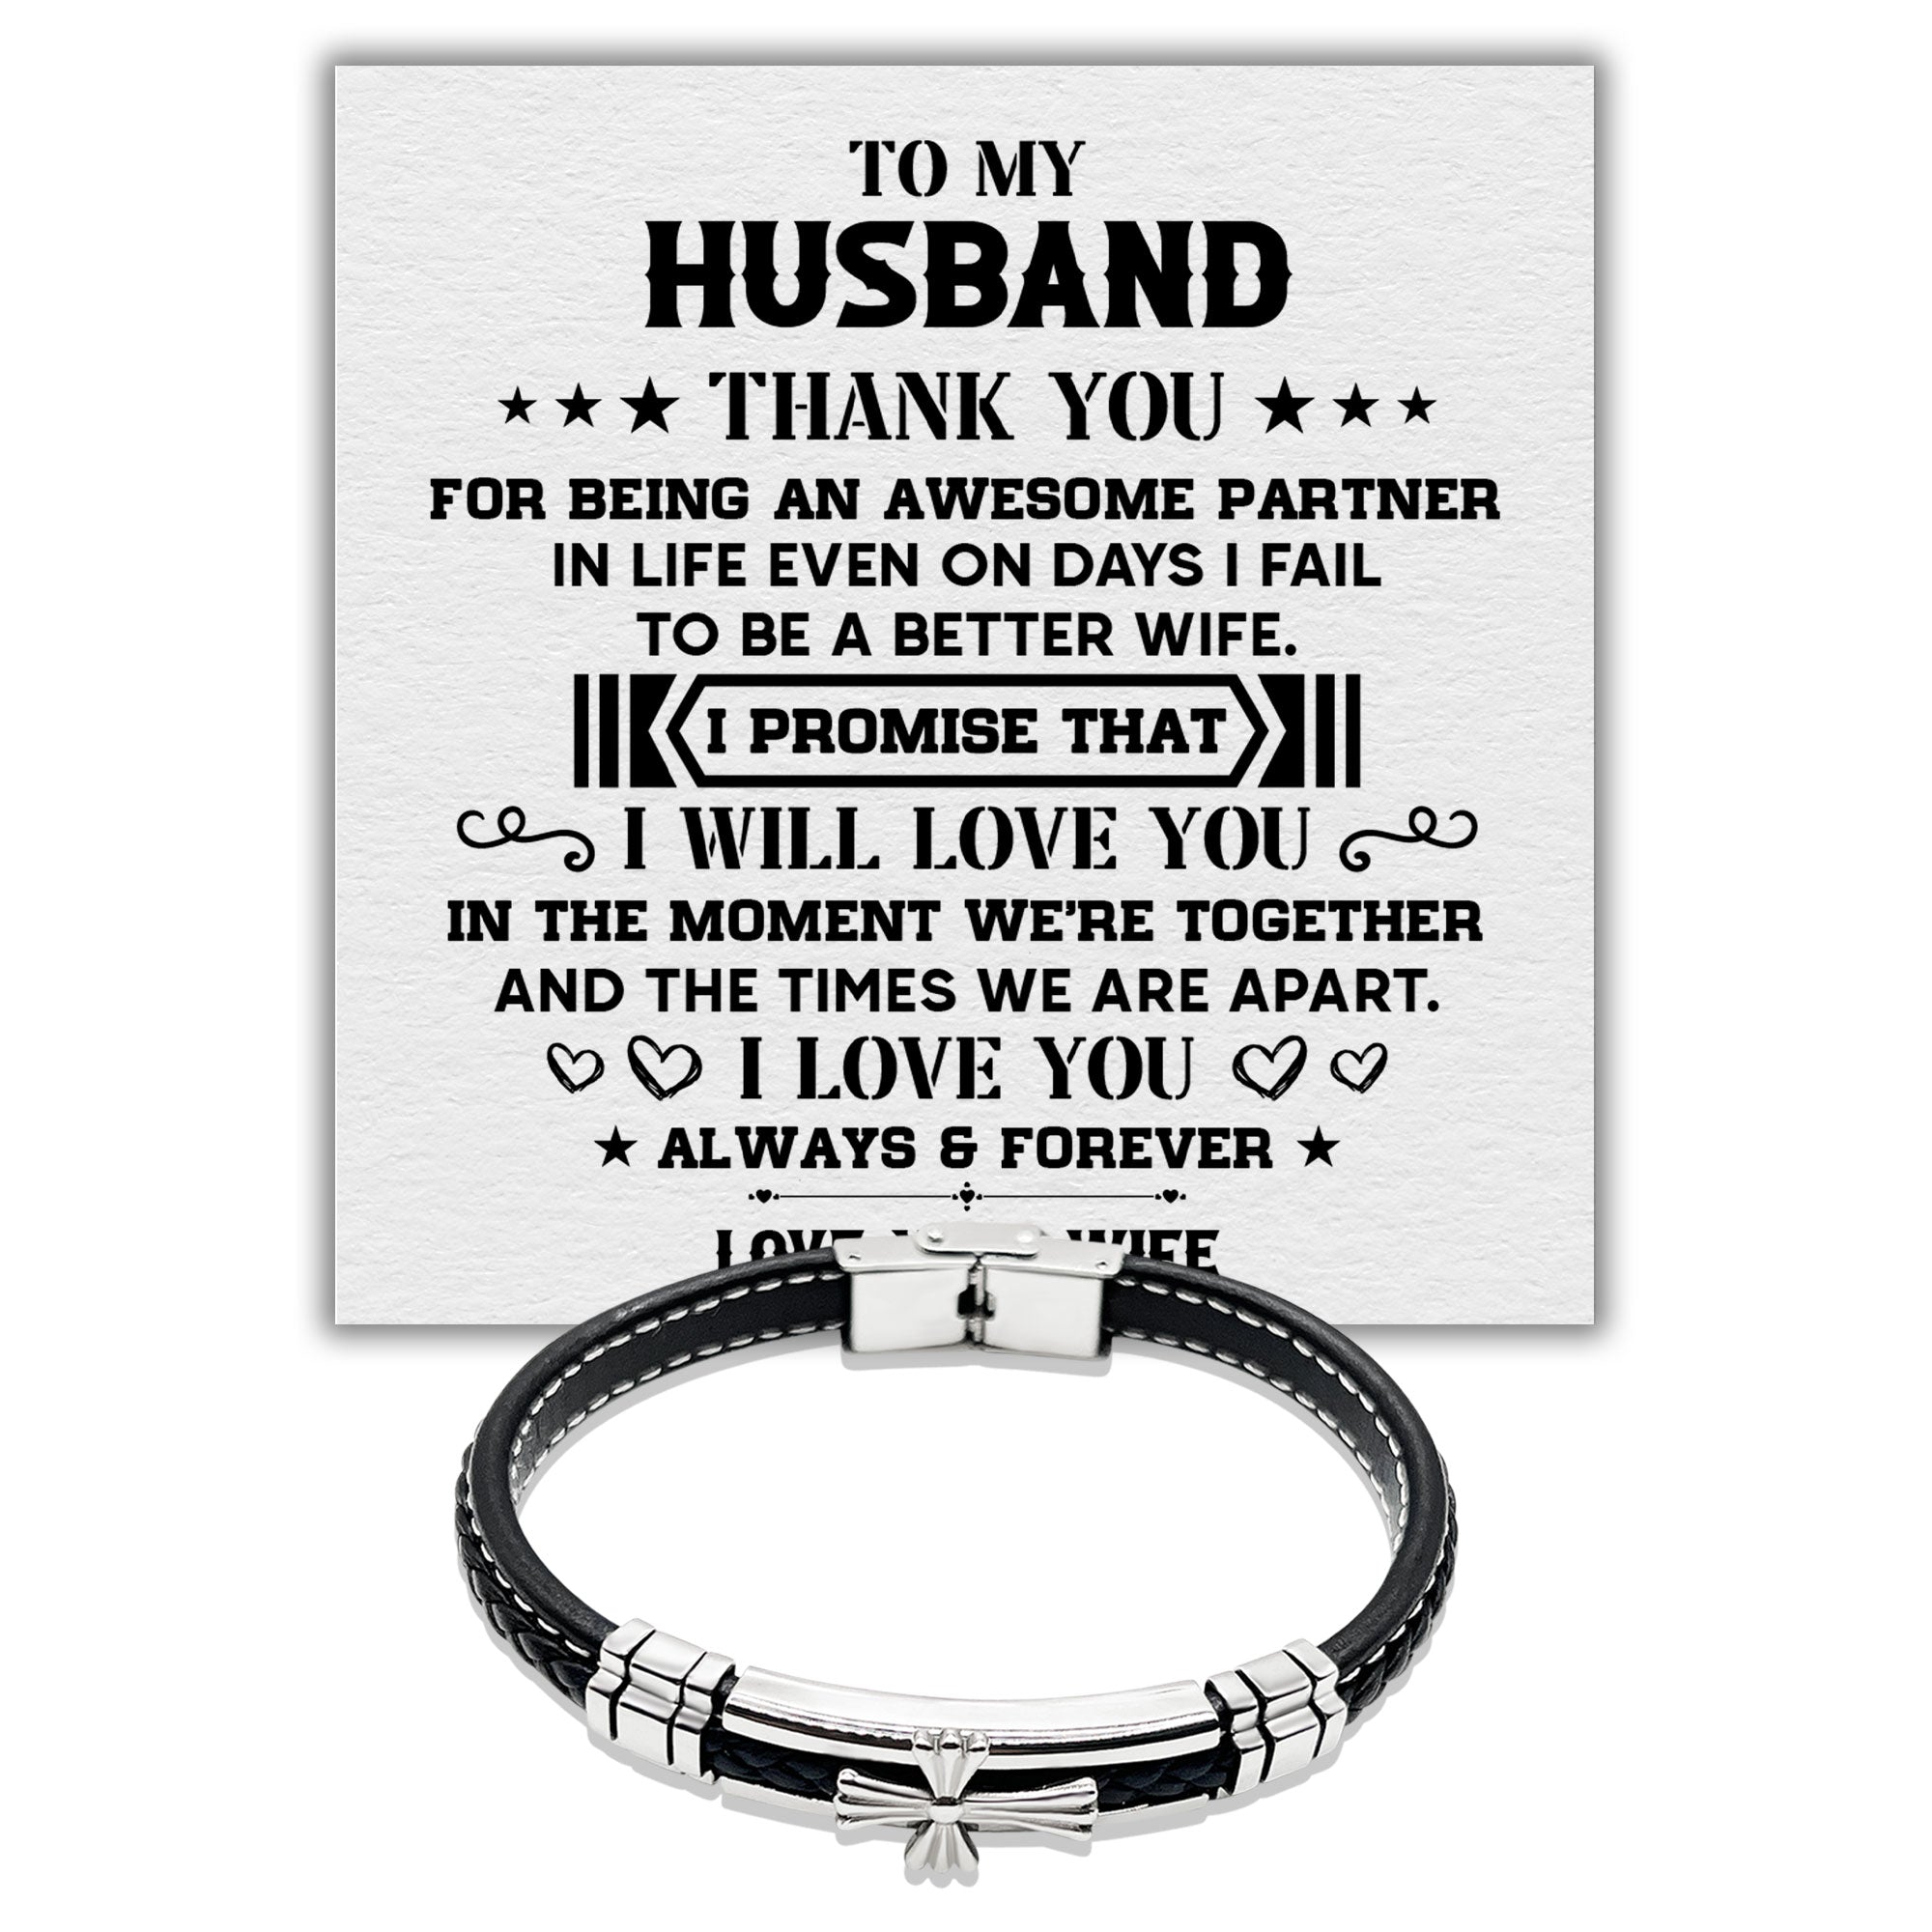 To my Husband I Love You Always and Forever - Premium Stainless Steel Celtic Cross Black Italian Leather Bracelet